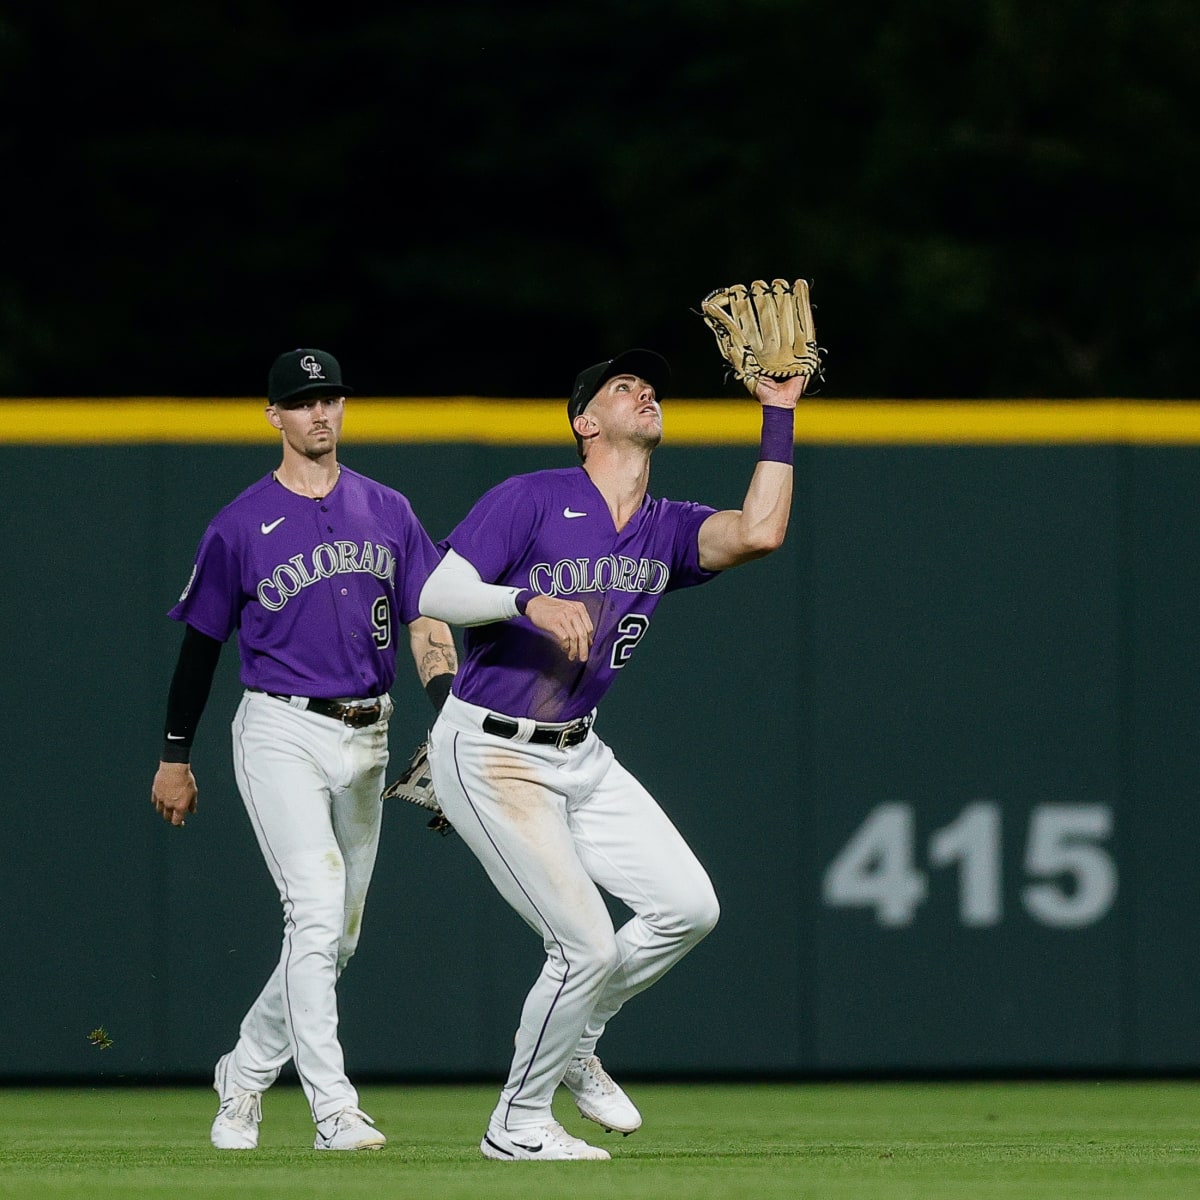 Brenton Doyle notches another outfield assist in Rockies loss